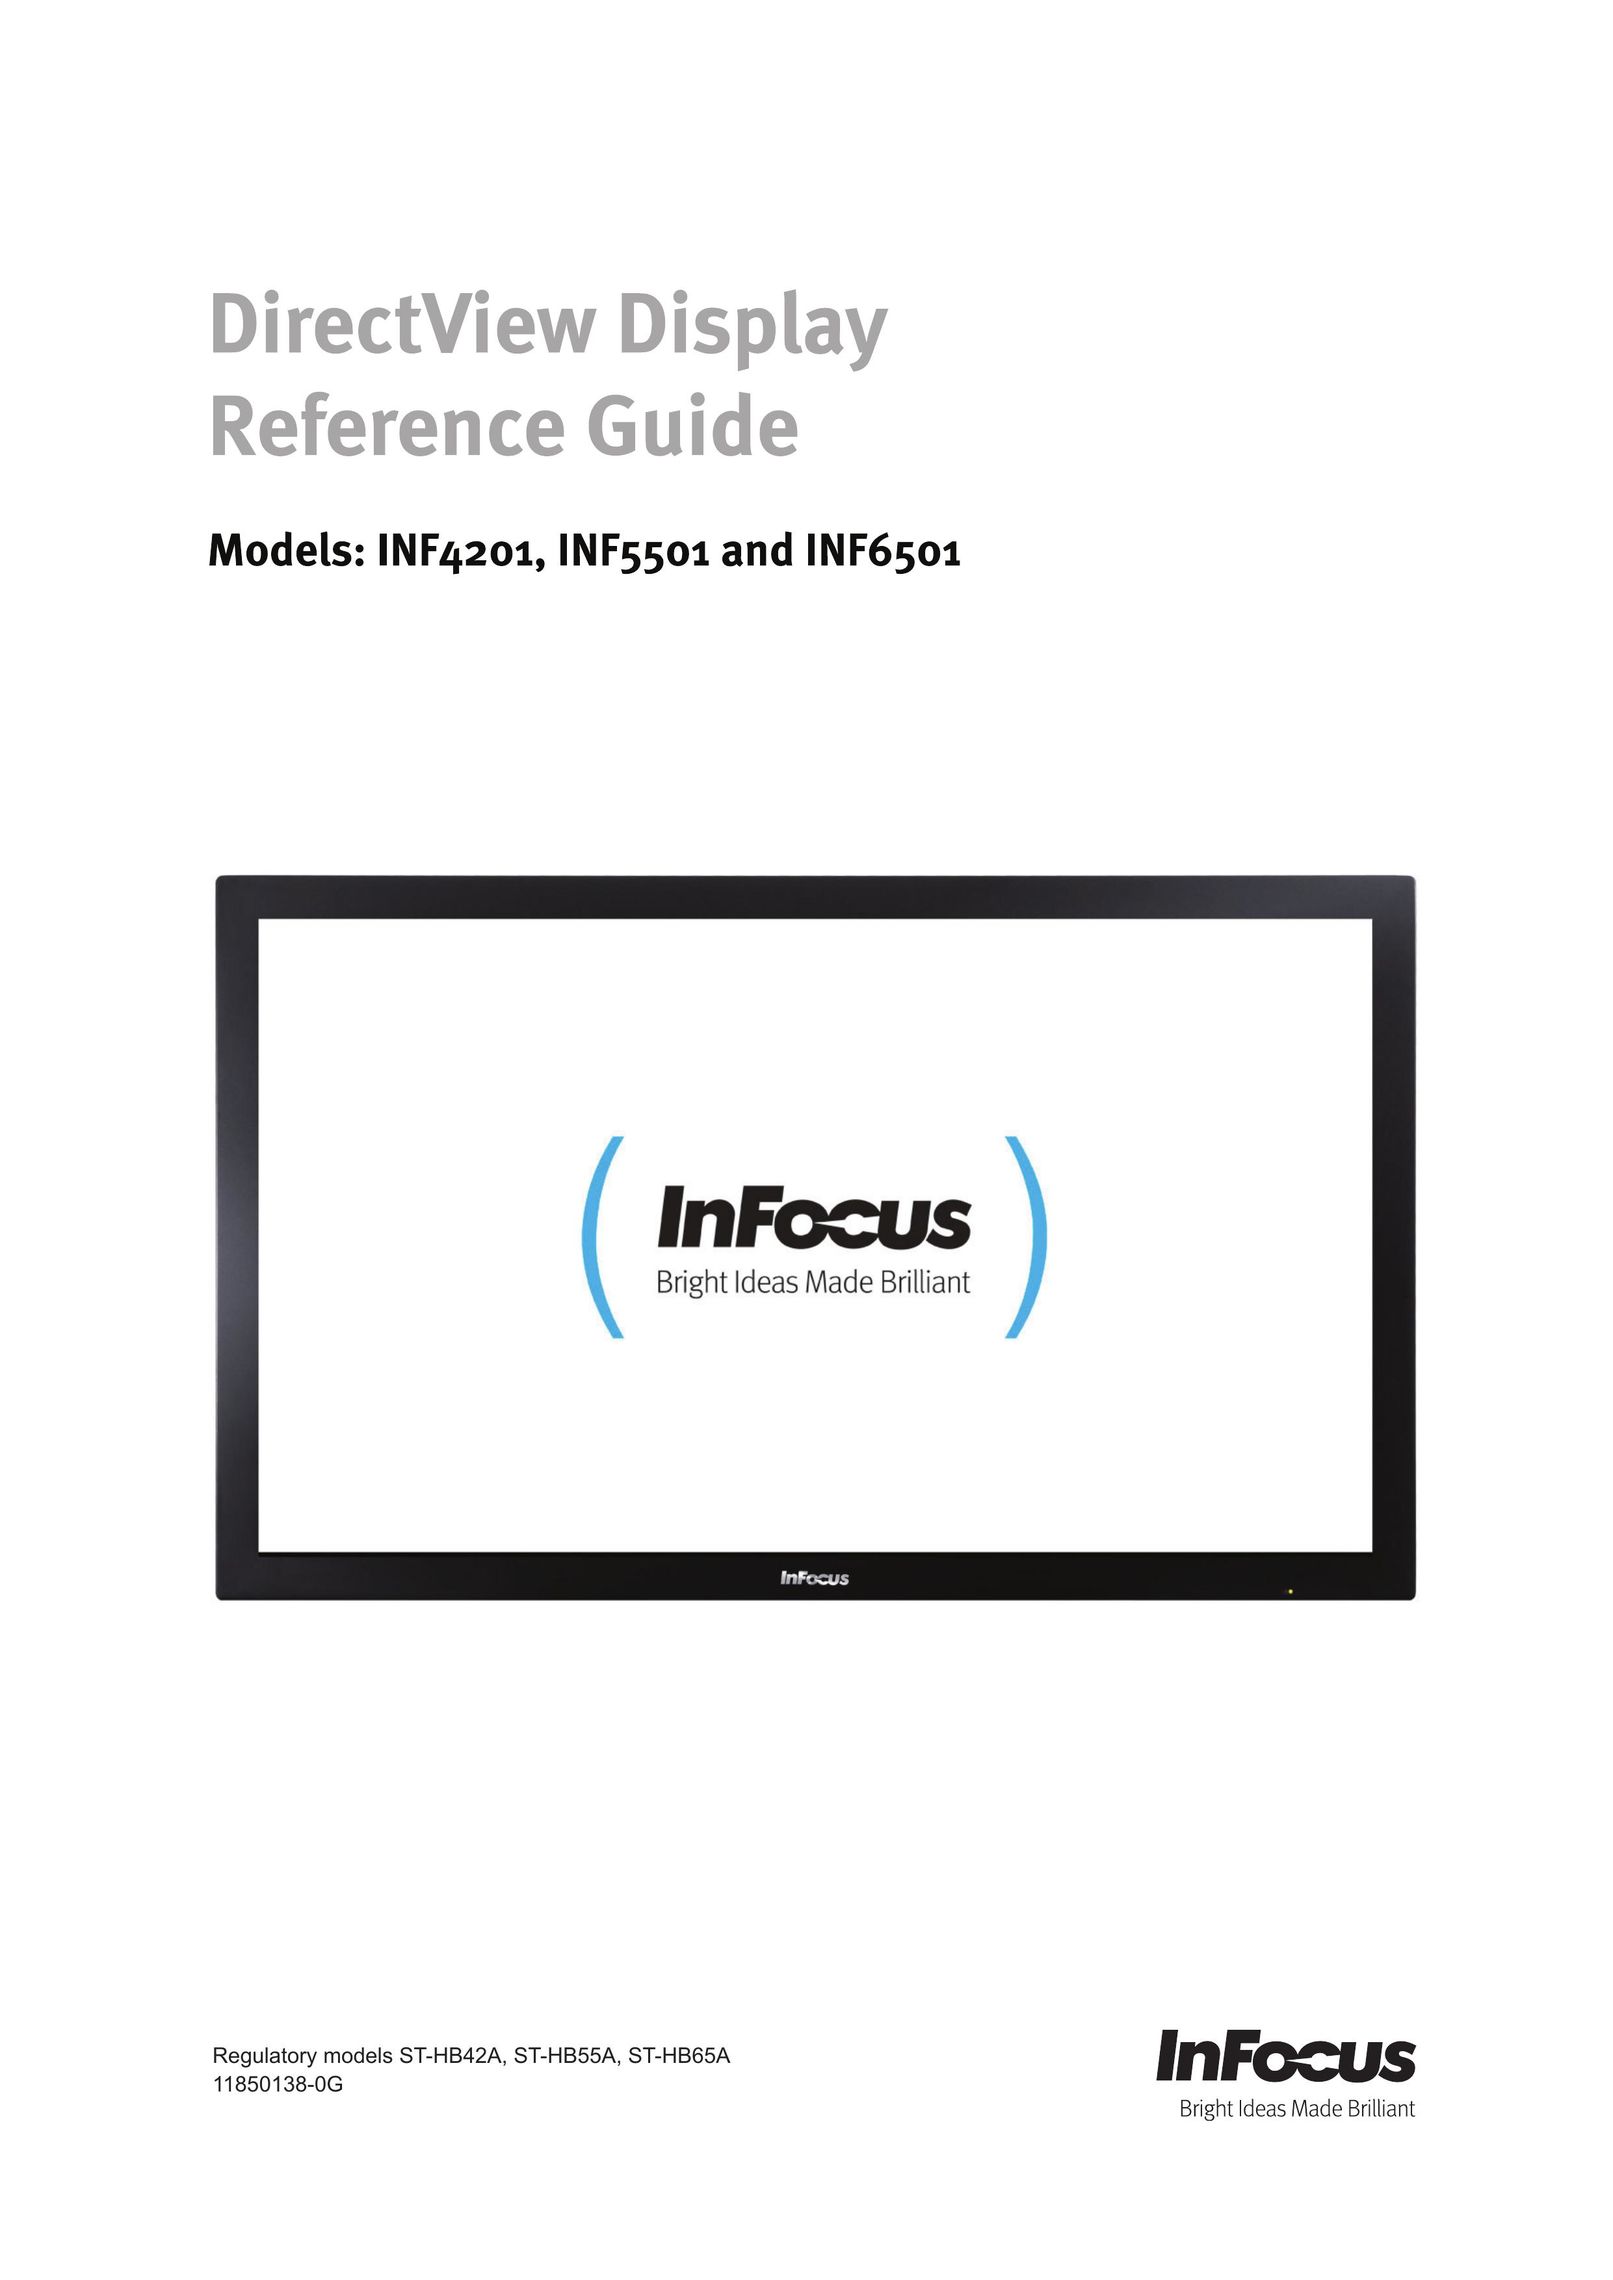 InFocus ST-HB55A Computer Monitor User Manual